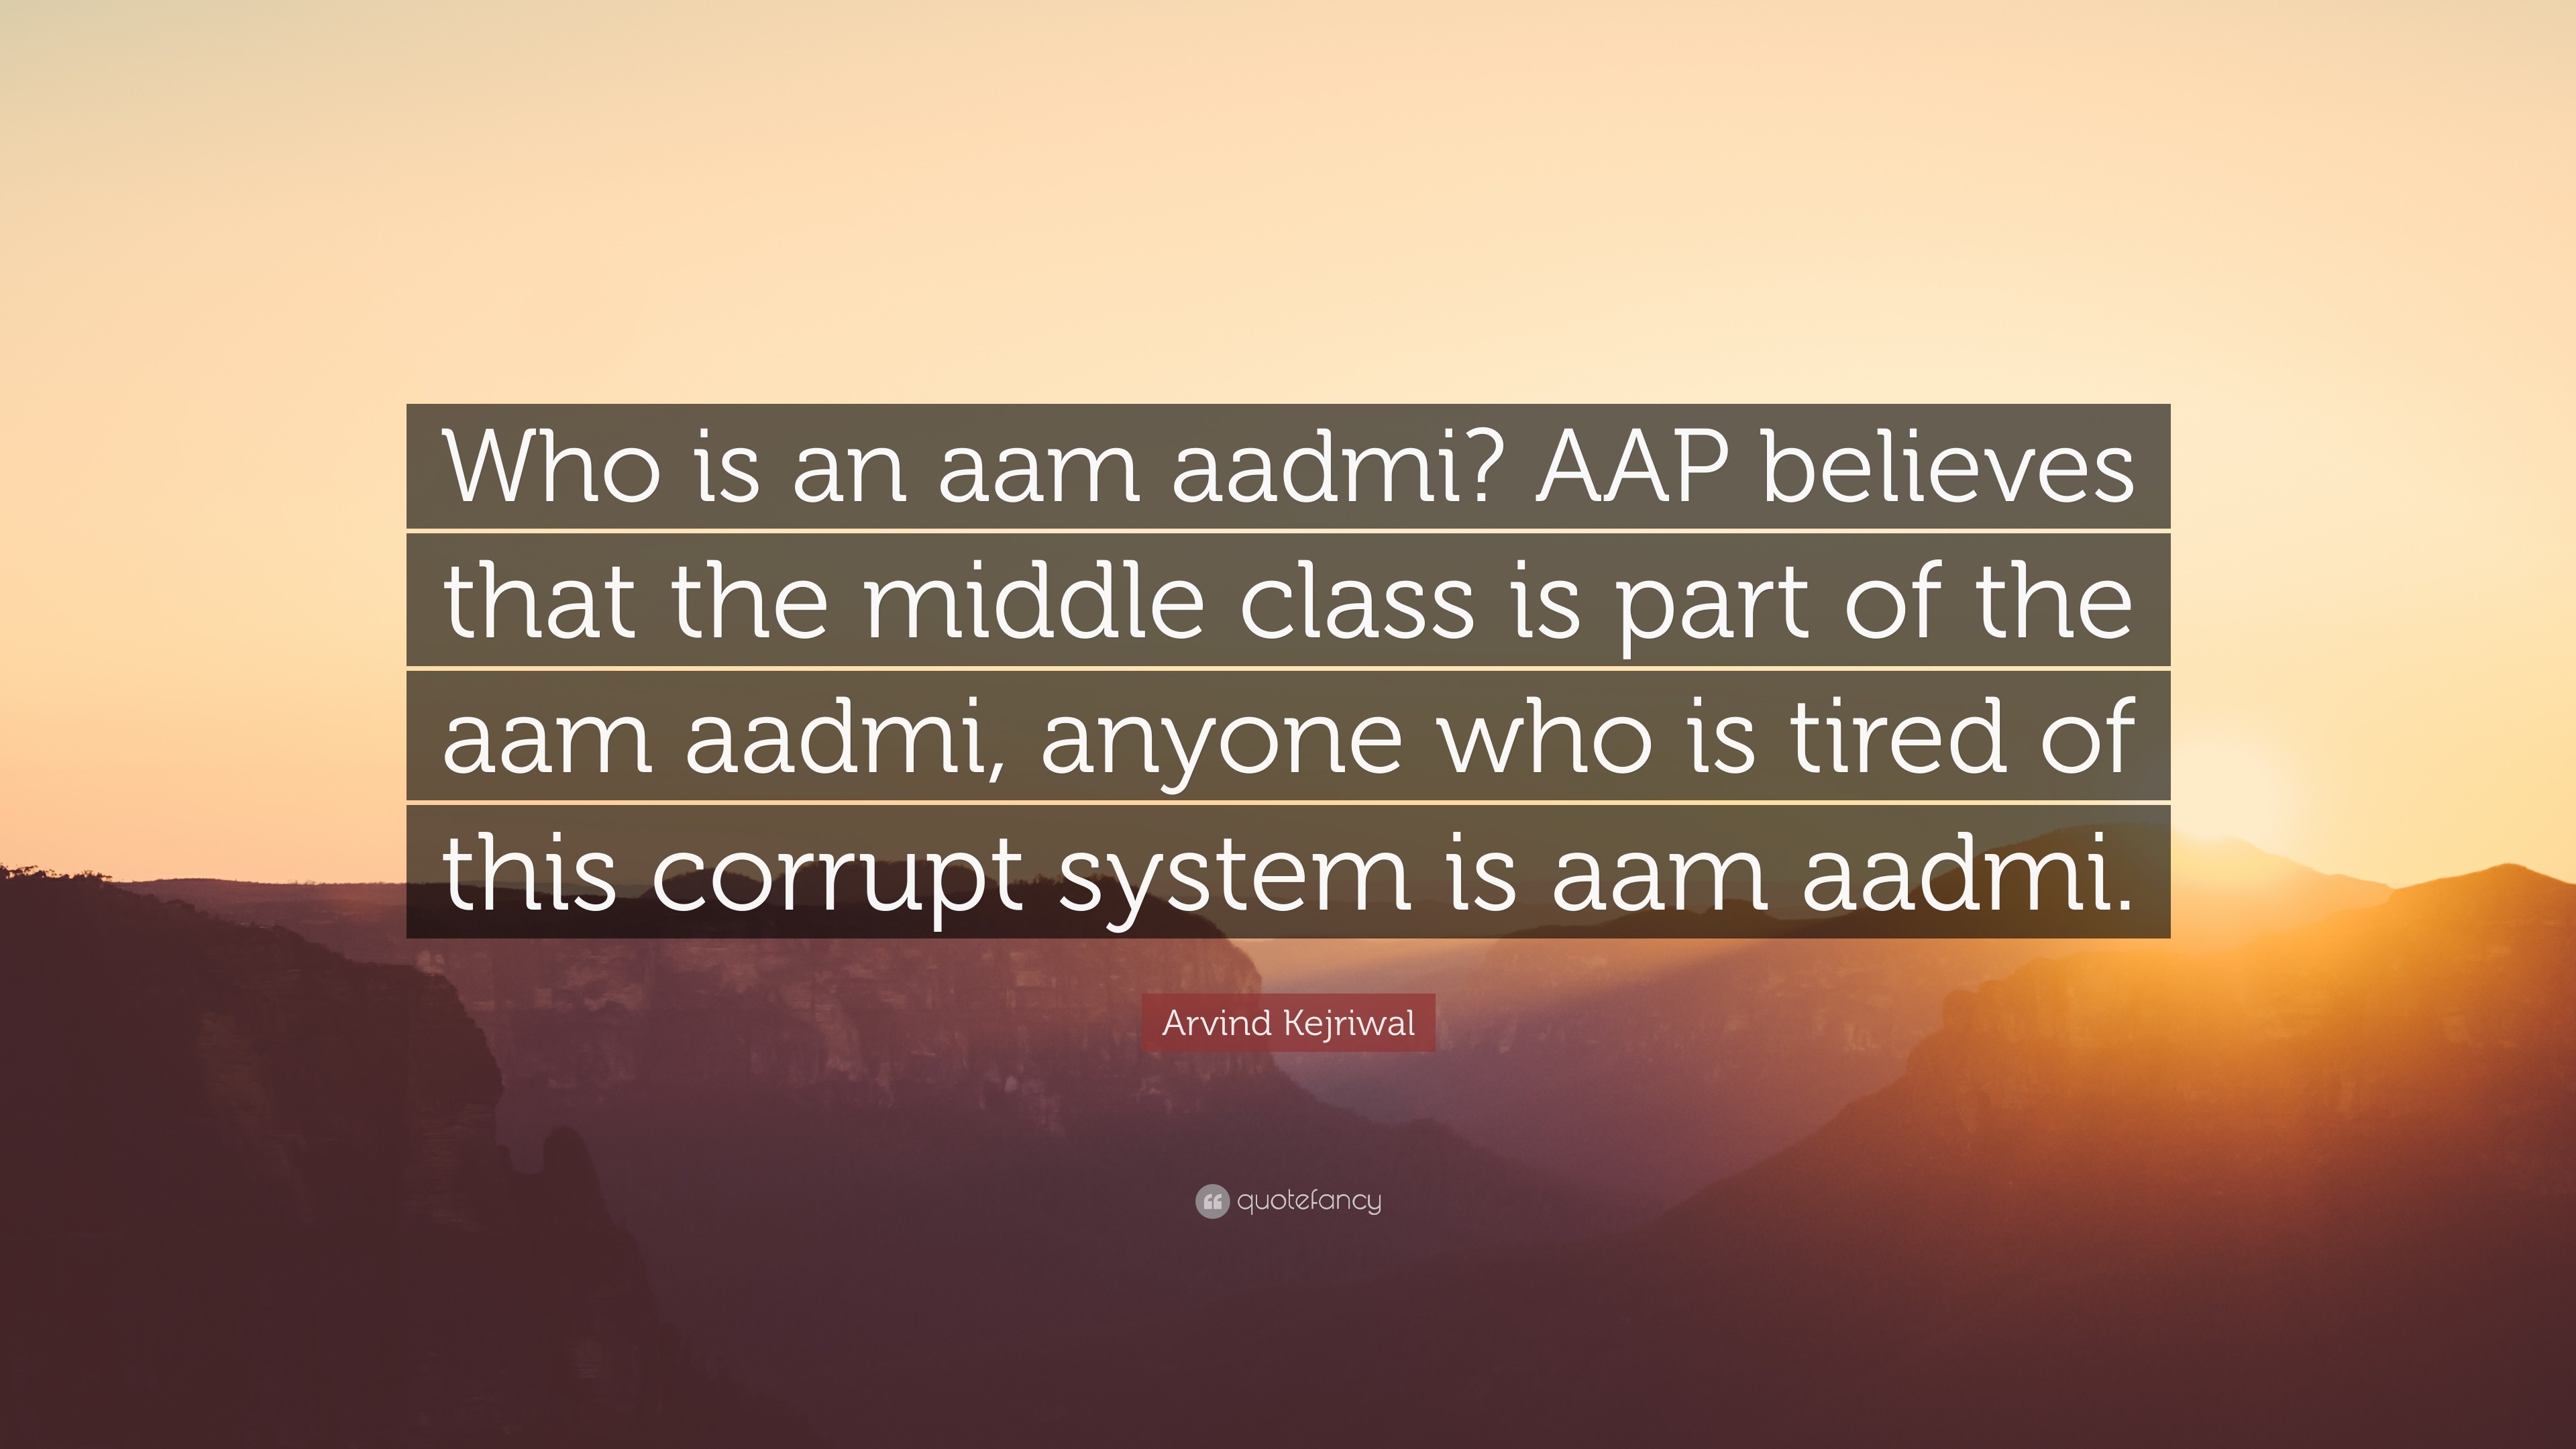 3840x2160 5 wallpapers. Arvind Kejriwal Quote: “Who is an aam aadmi? AAP believes  that the middle